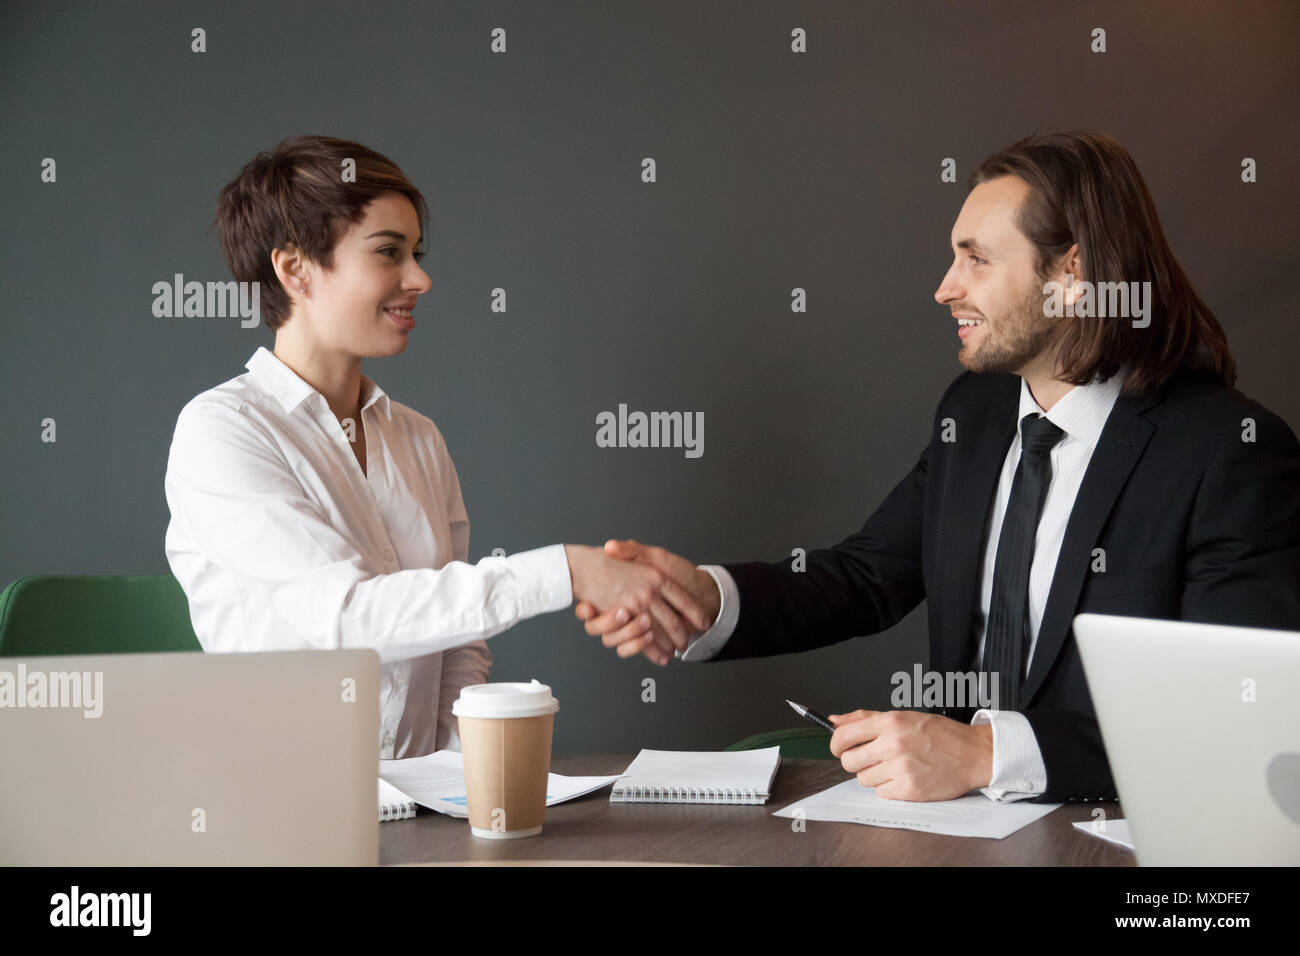 Business partners greeting with handshake during office meeting Stock Photo